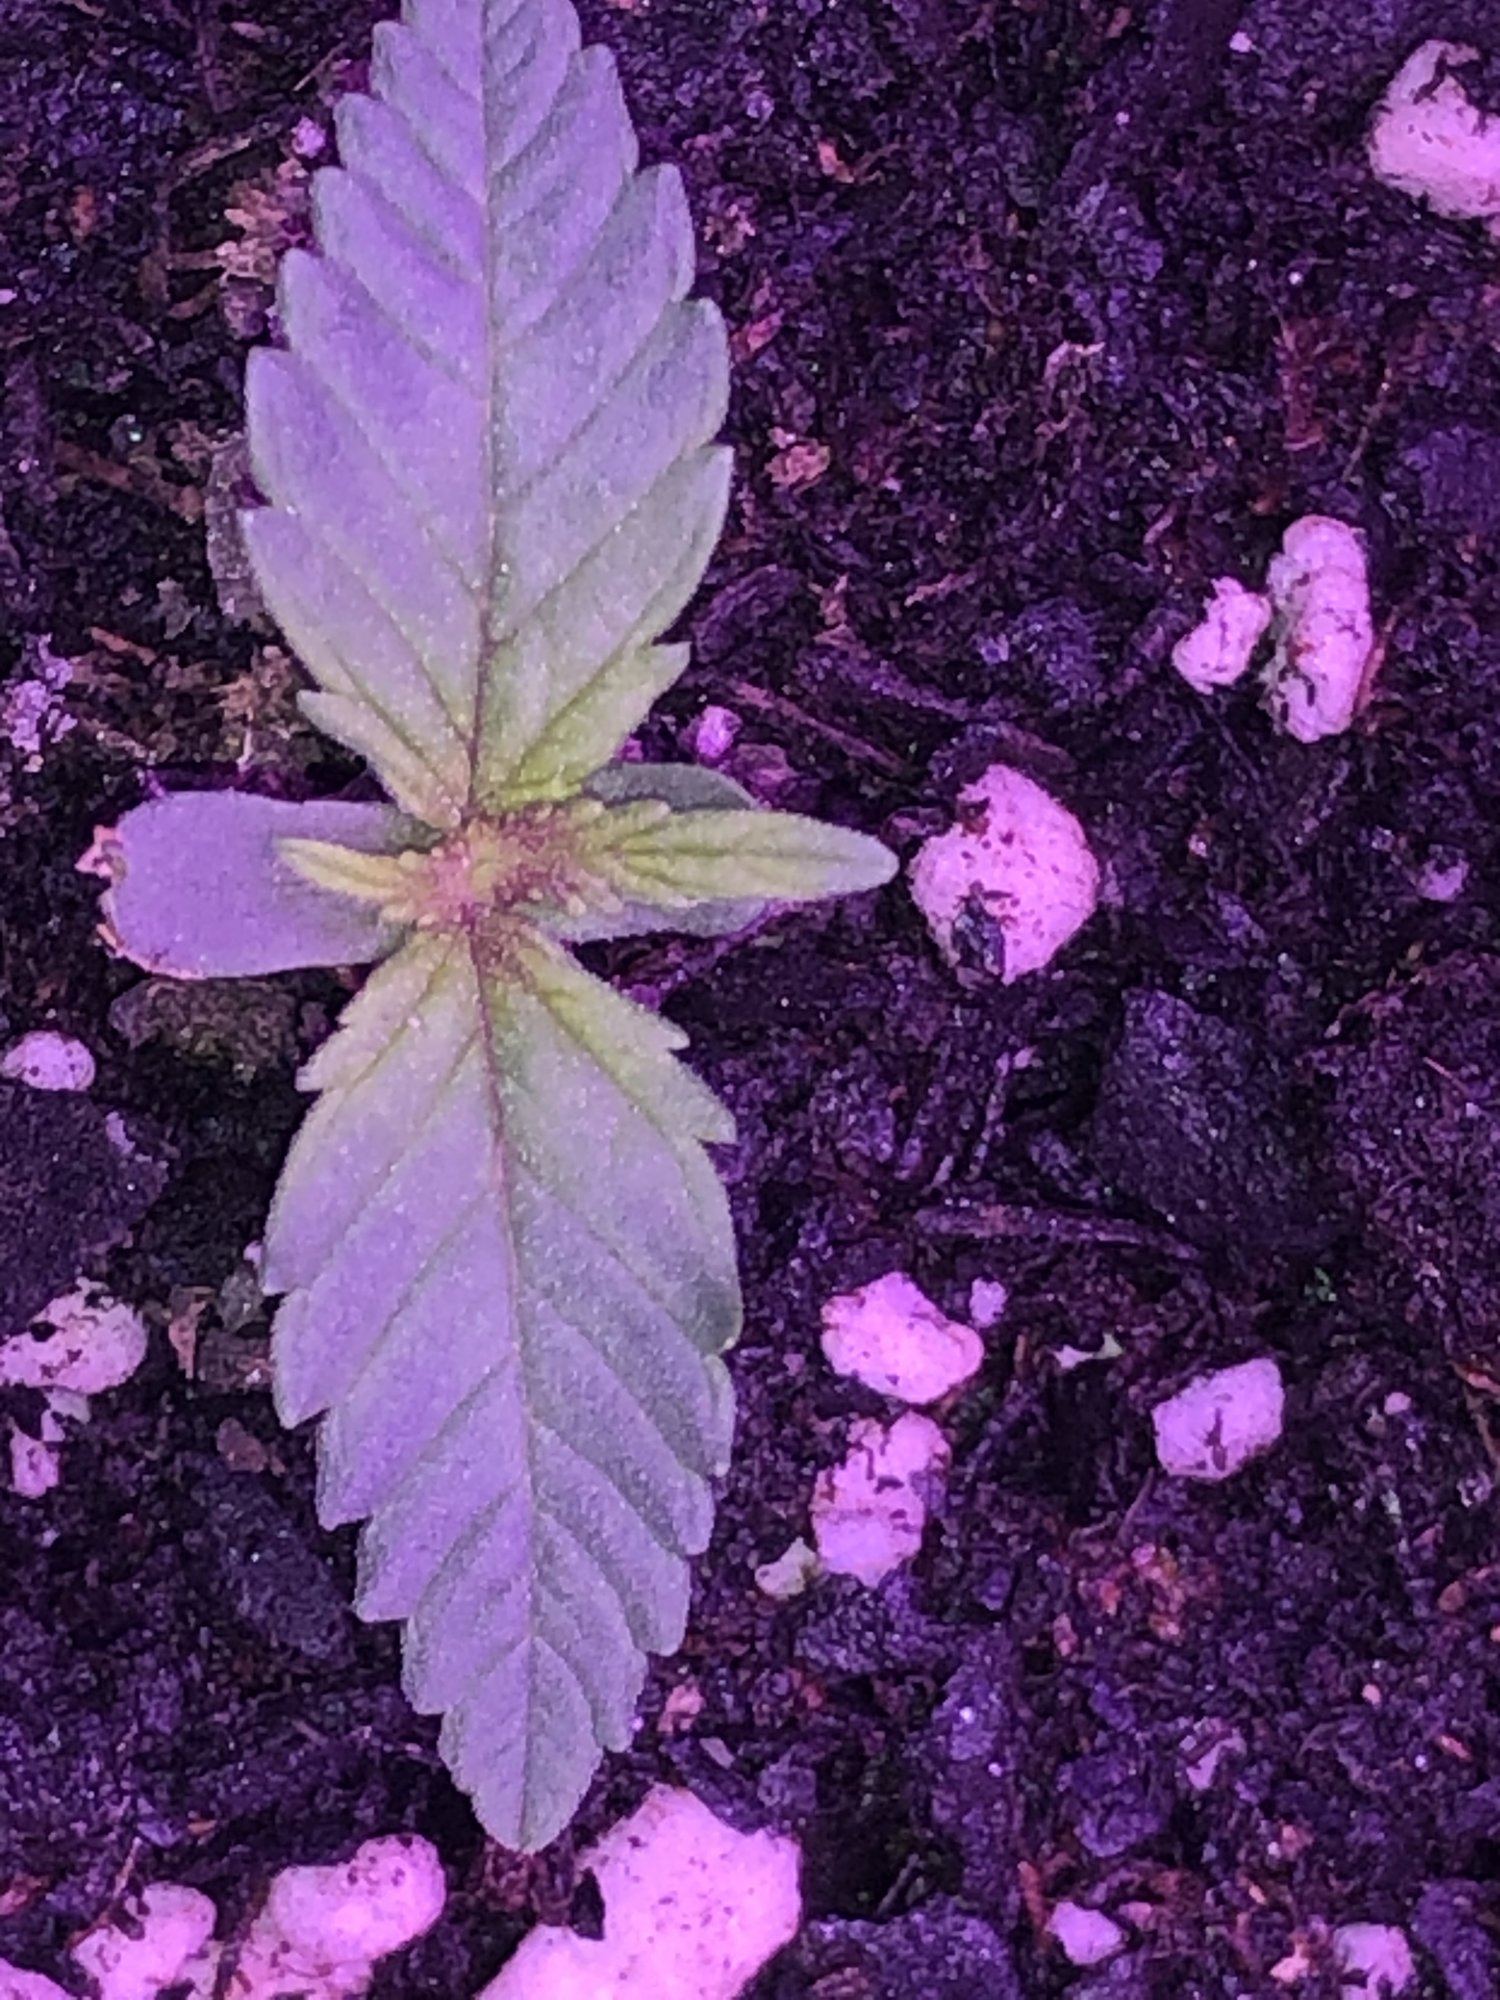 Hey first timer  reddish growth coming from center of seedling no idea what it is